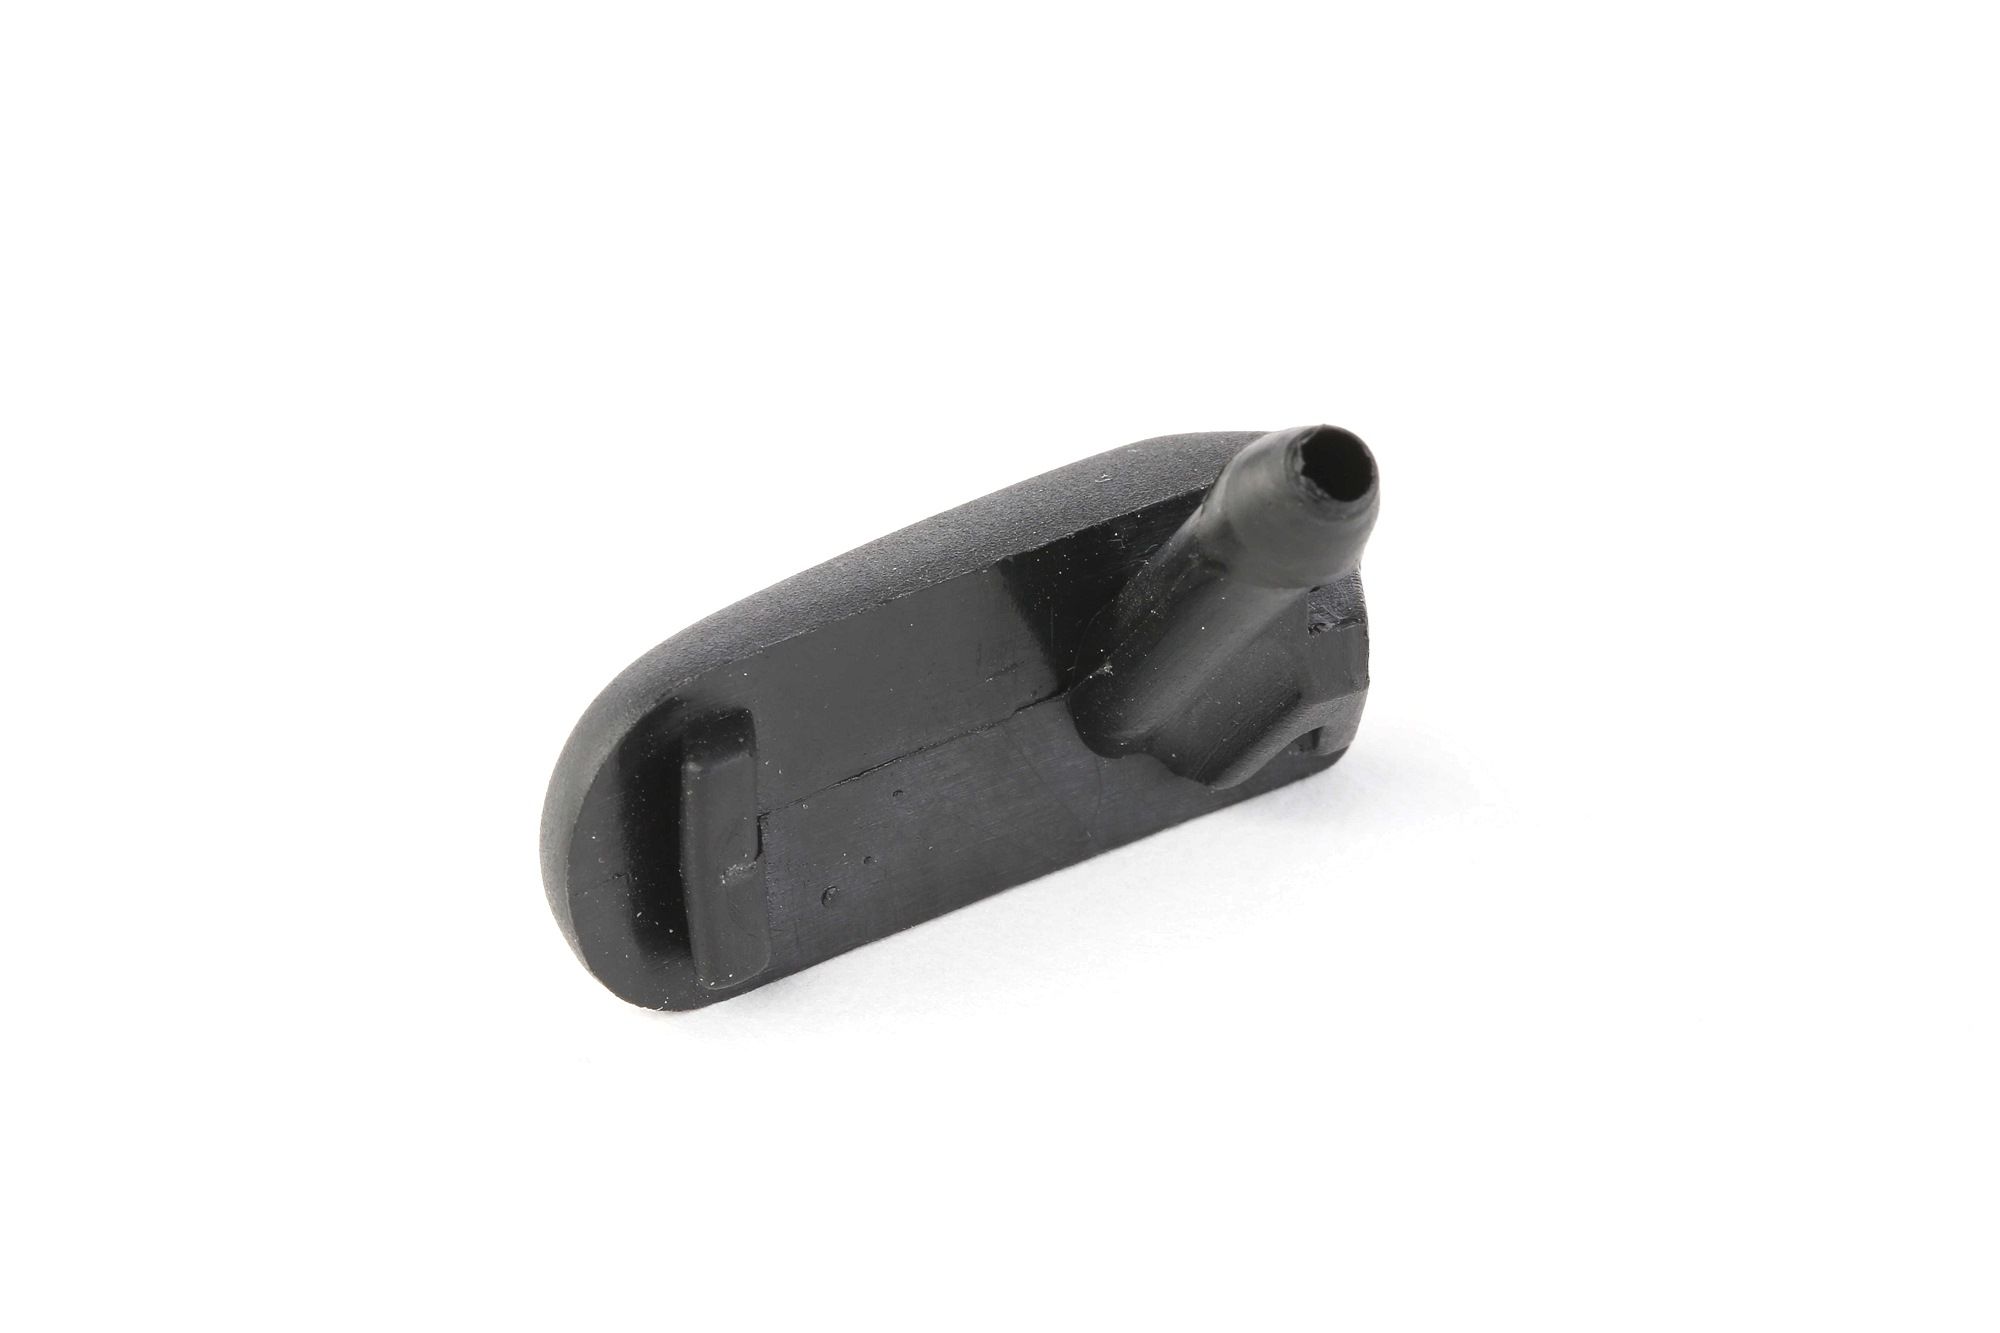 VEMO Gicleur Lave-Glace V10-08-0291 Gicleur Essuie-Glace,Buse Lave-Glace VW,SEAT,GOLF III 1H1,POLO 6